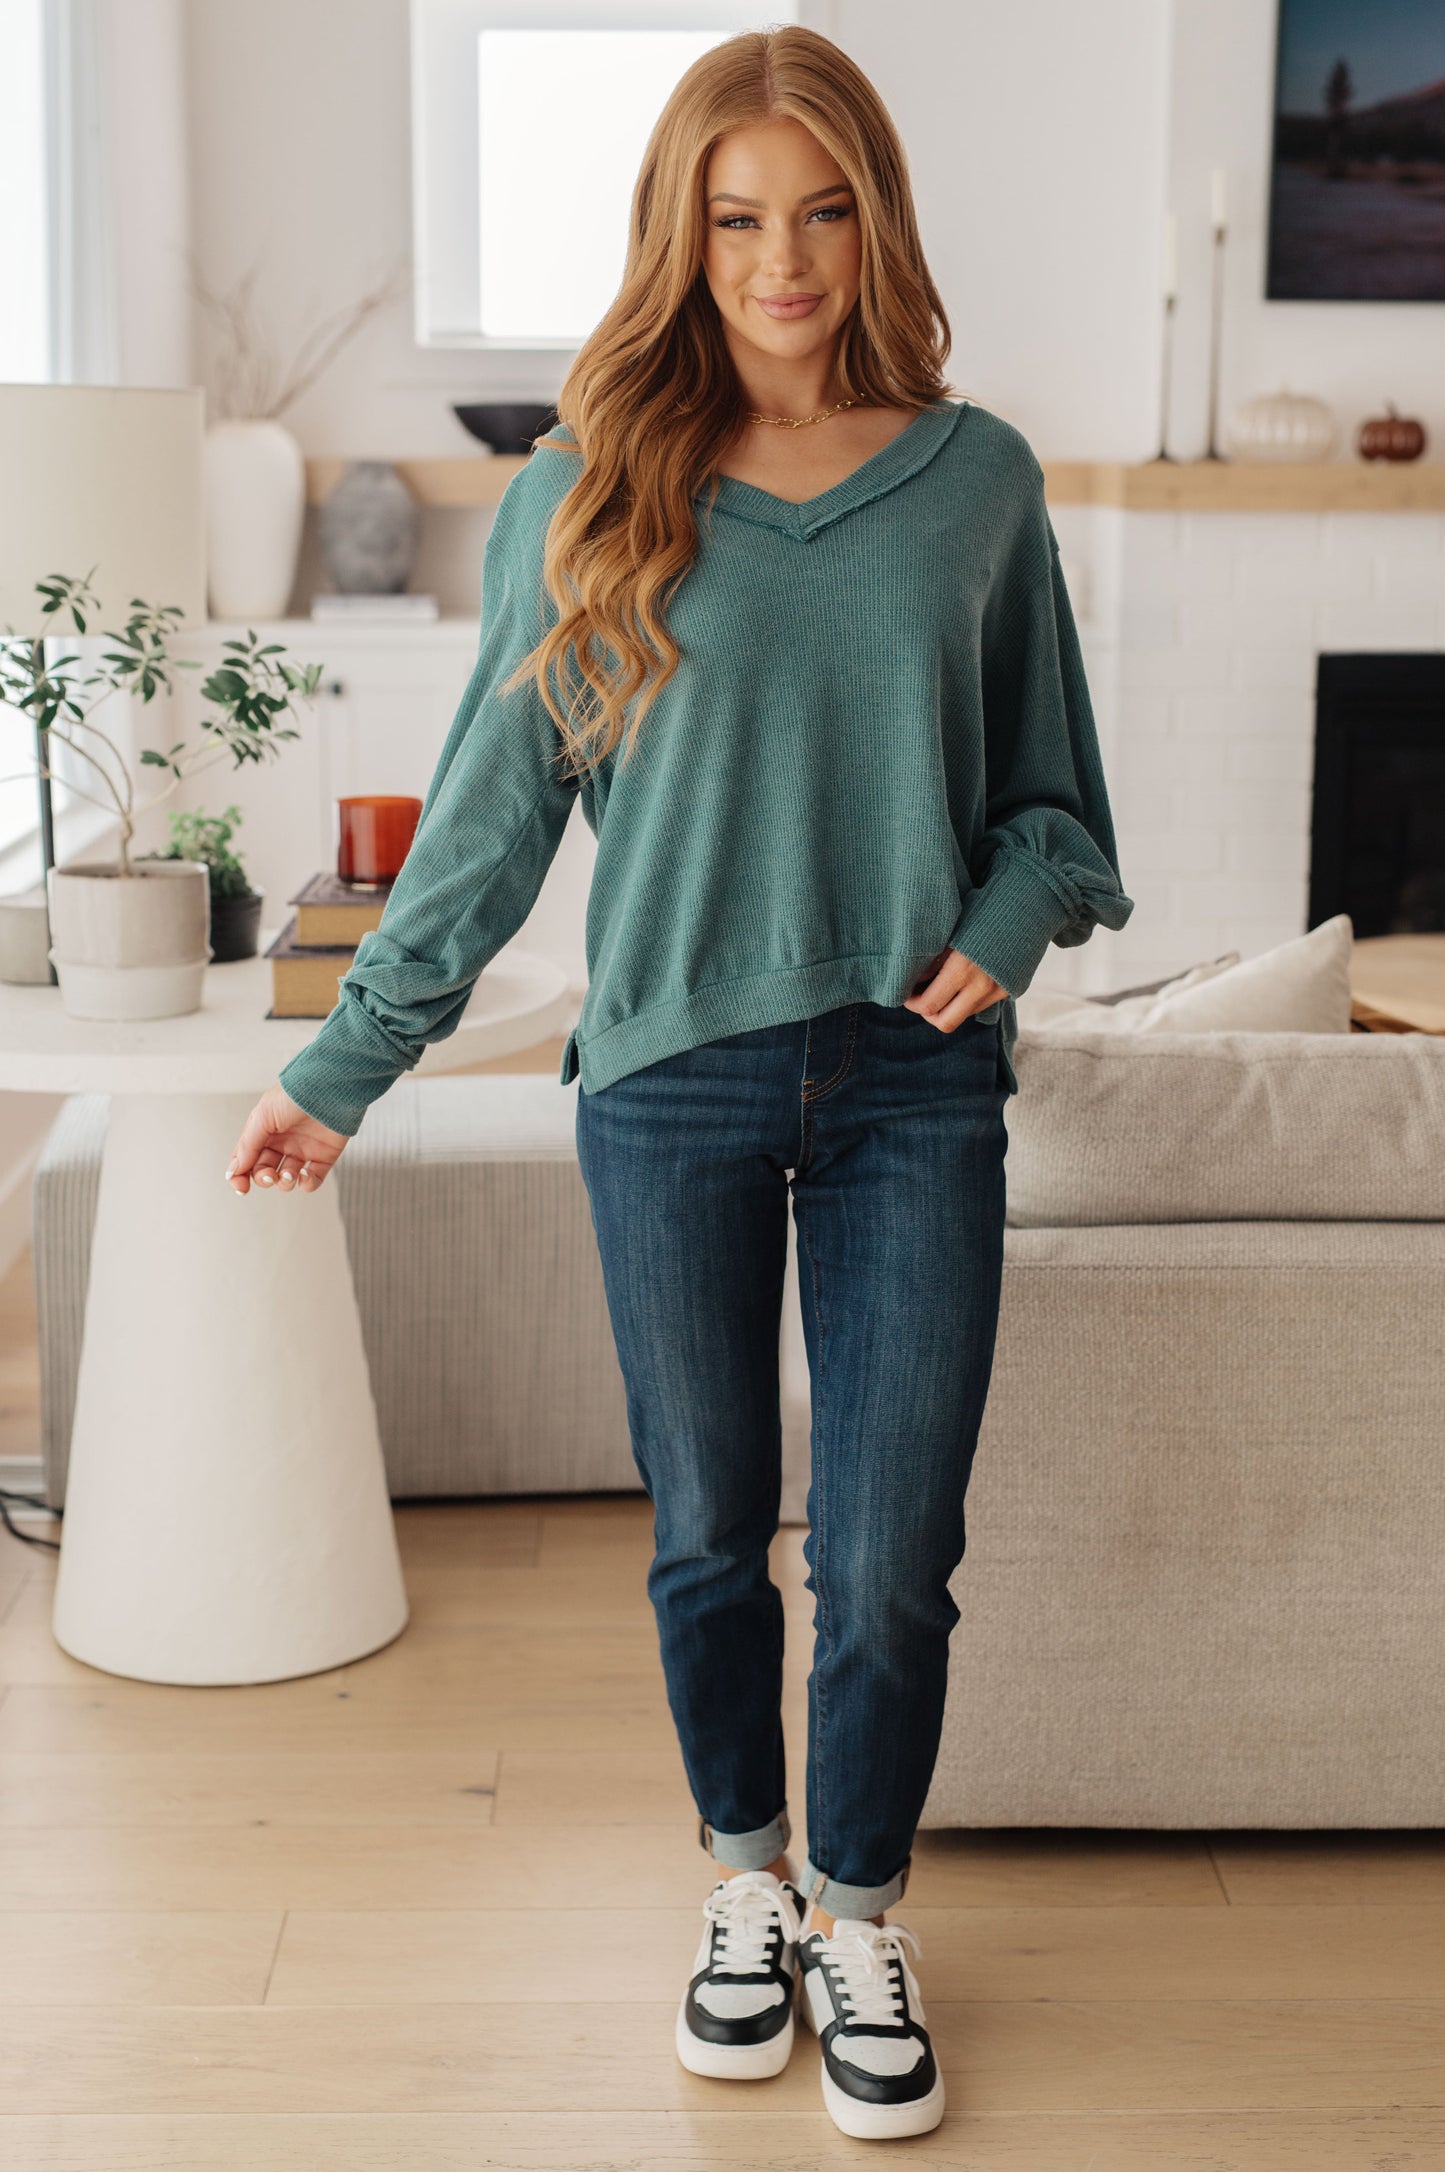 Sweater V-Neck Top